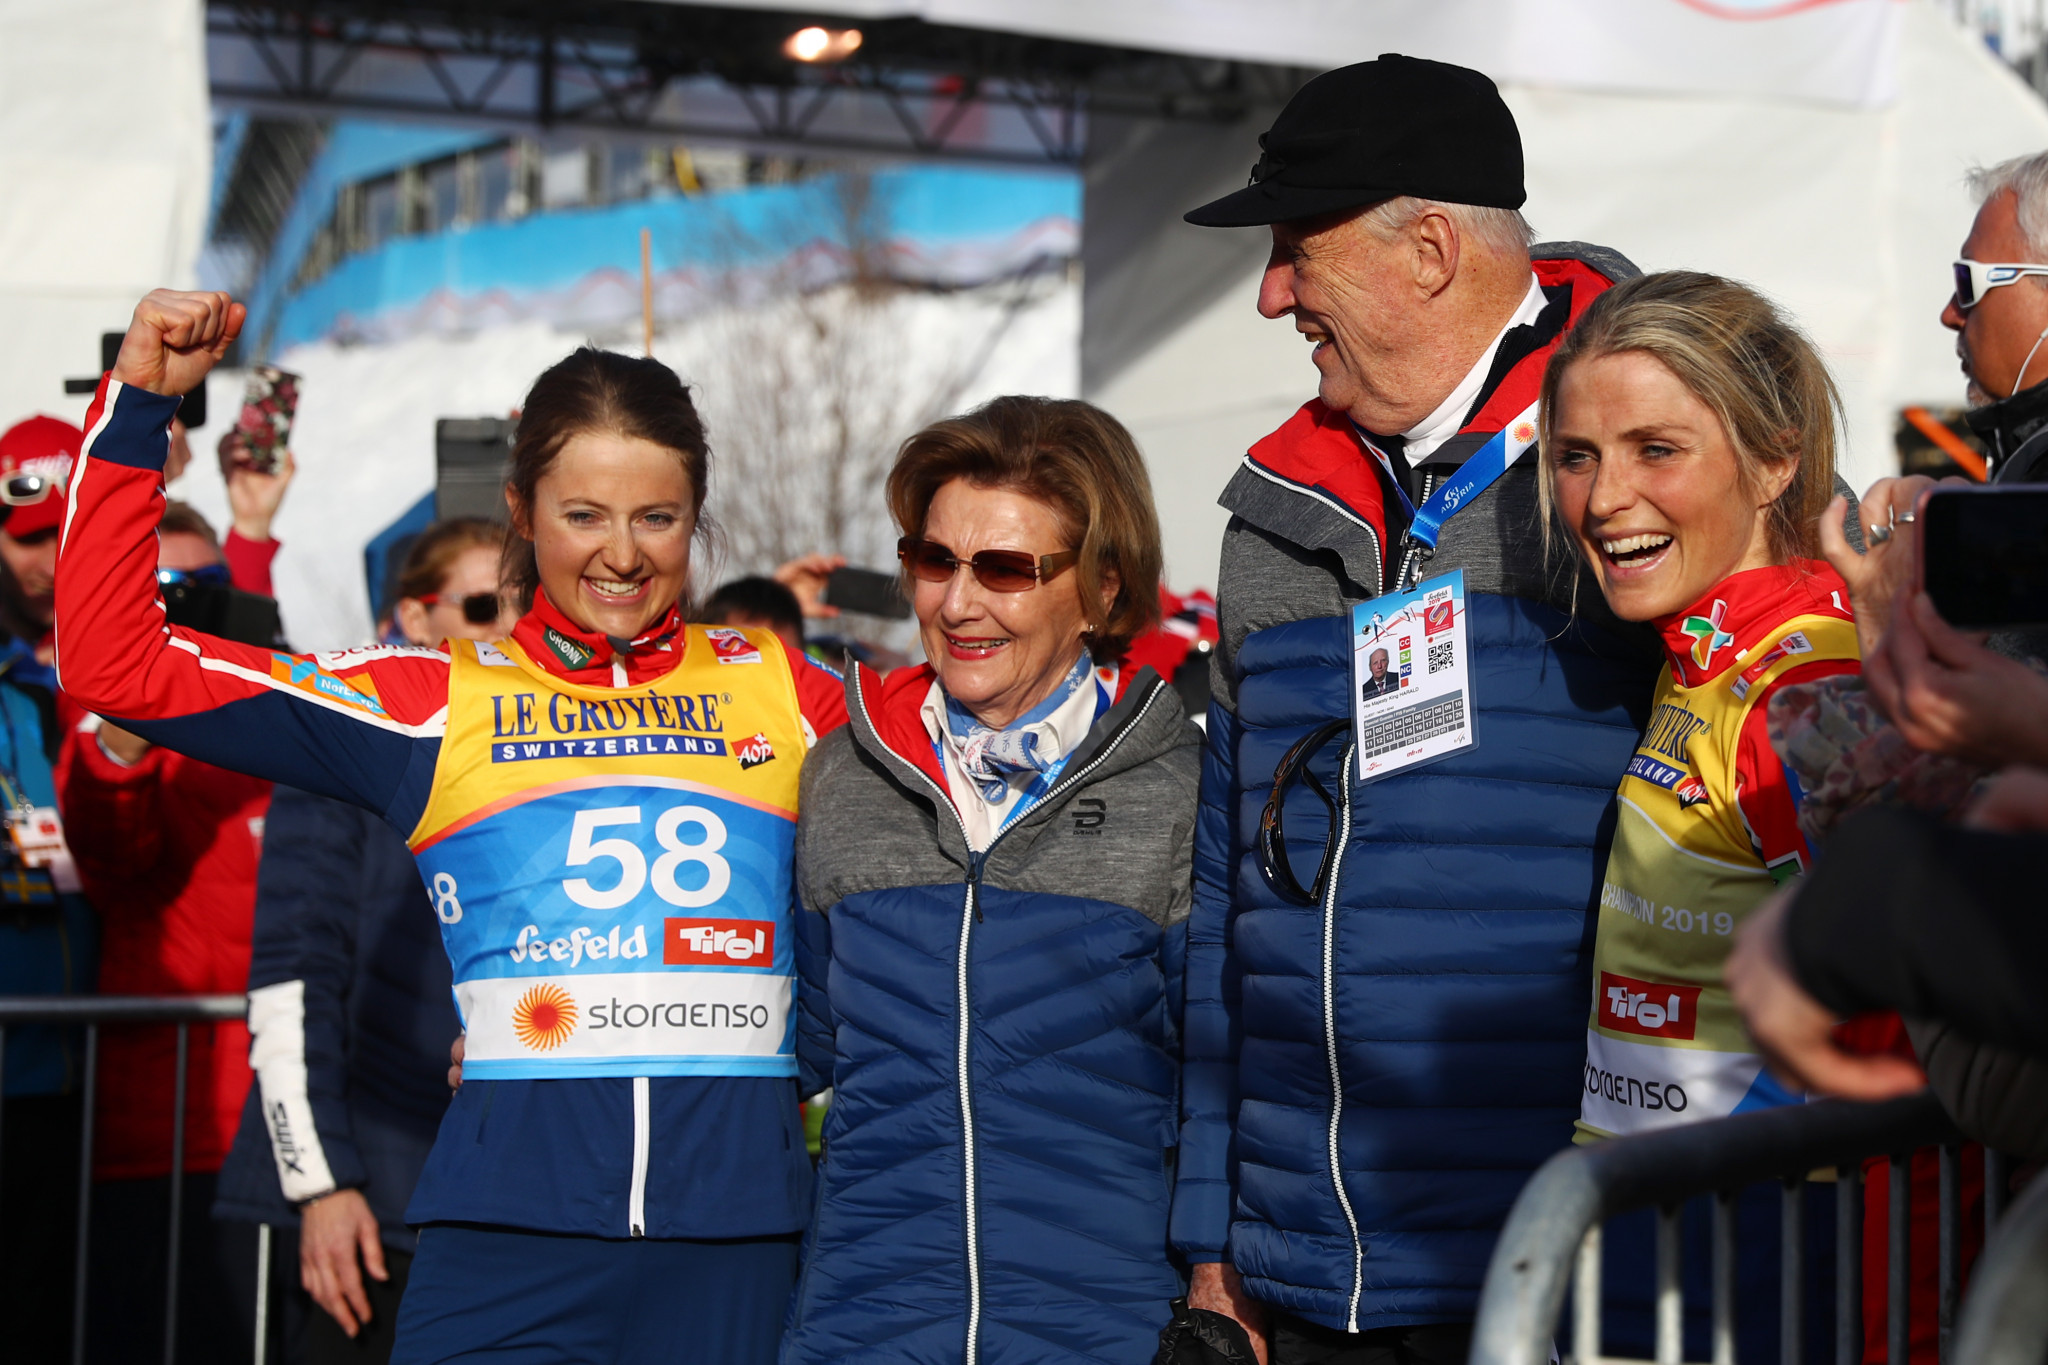 The Norwegian medallists celebrated with Queen Sonja of Norway and King Harald V after the event ©Getty Images